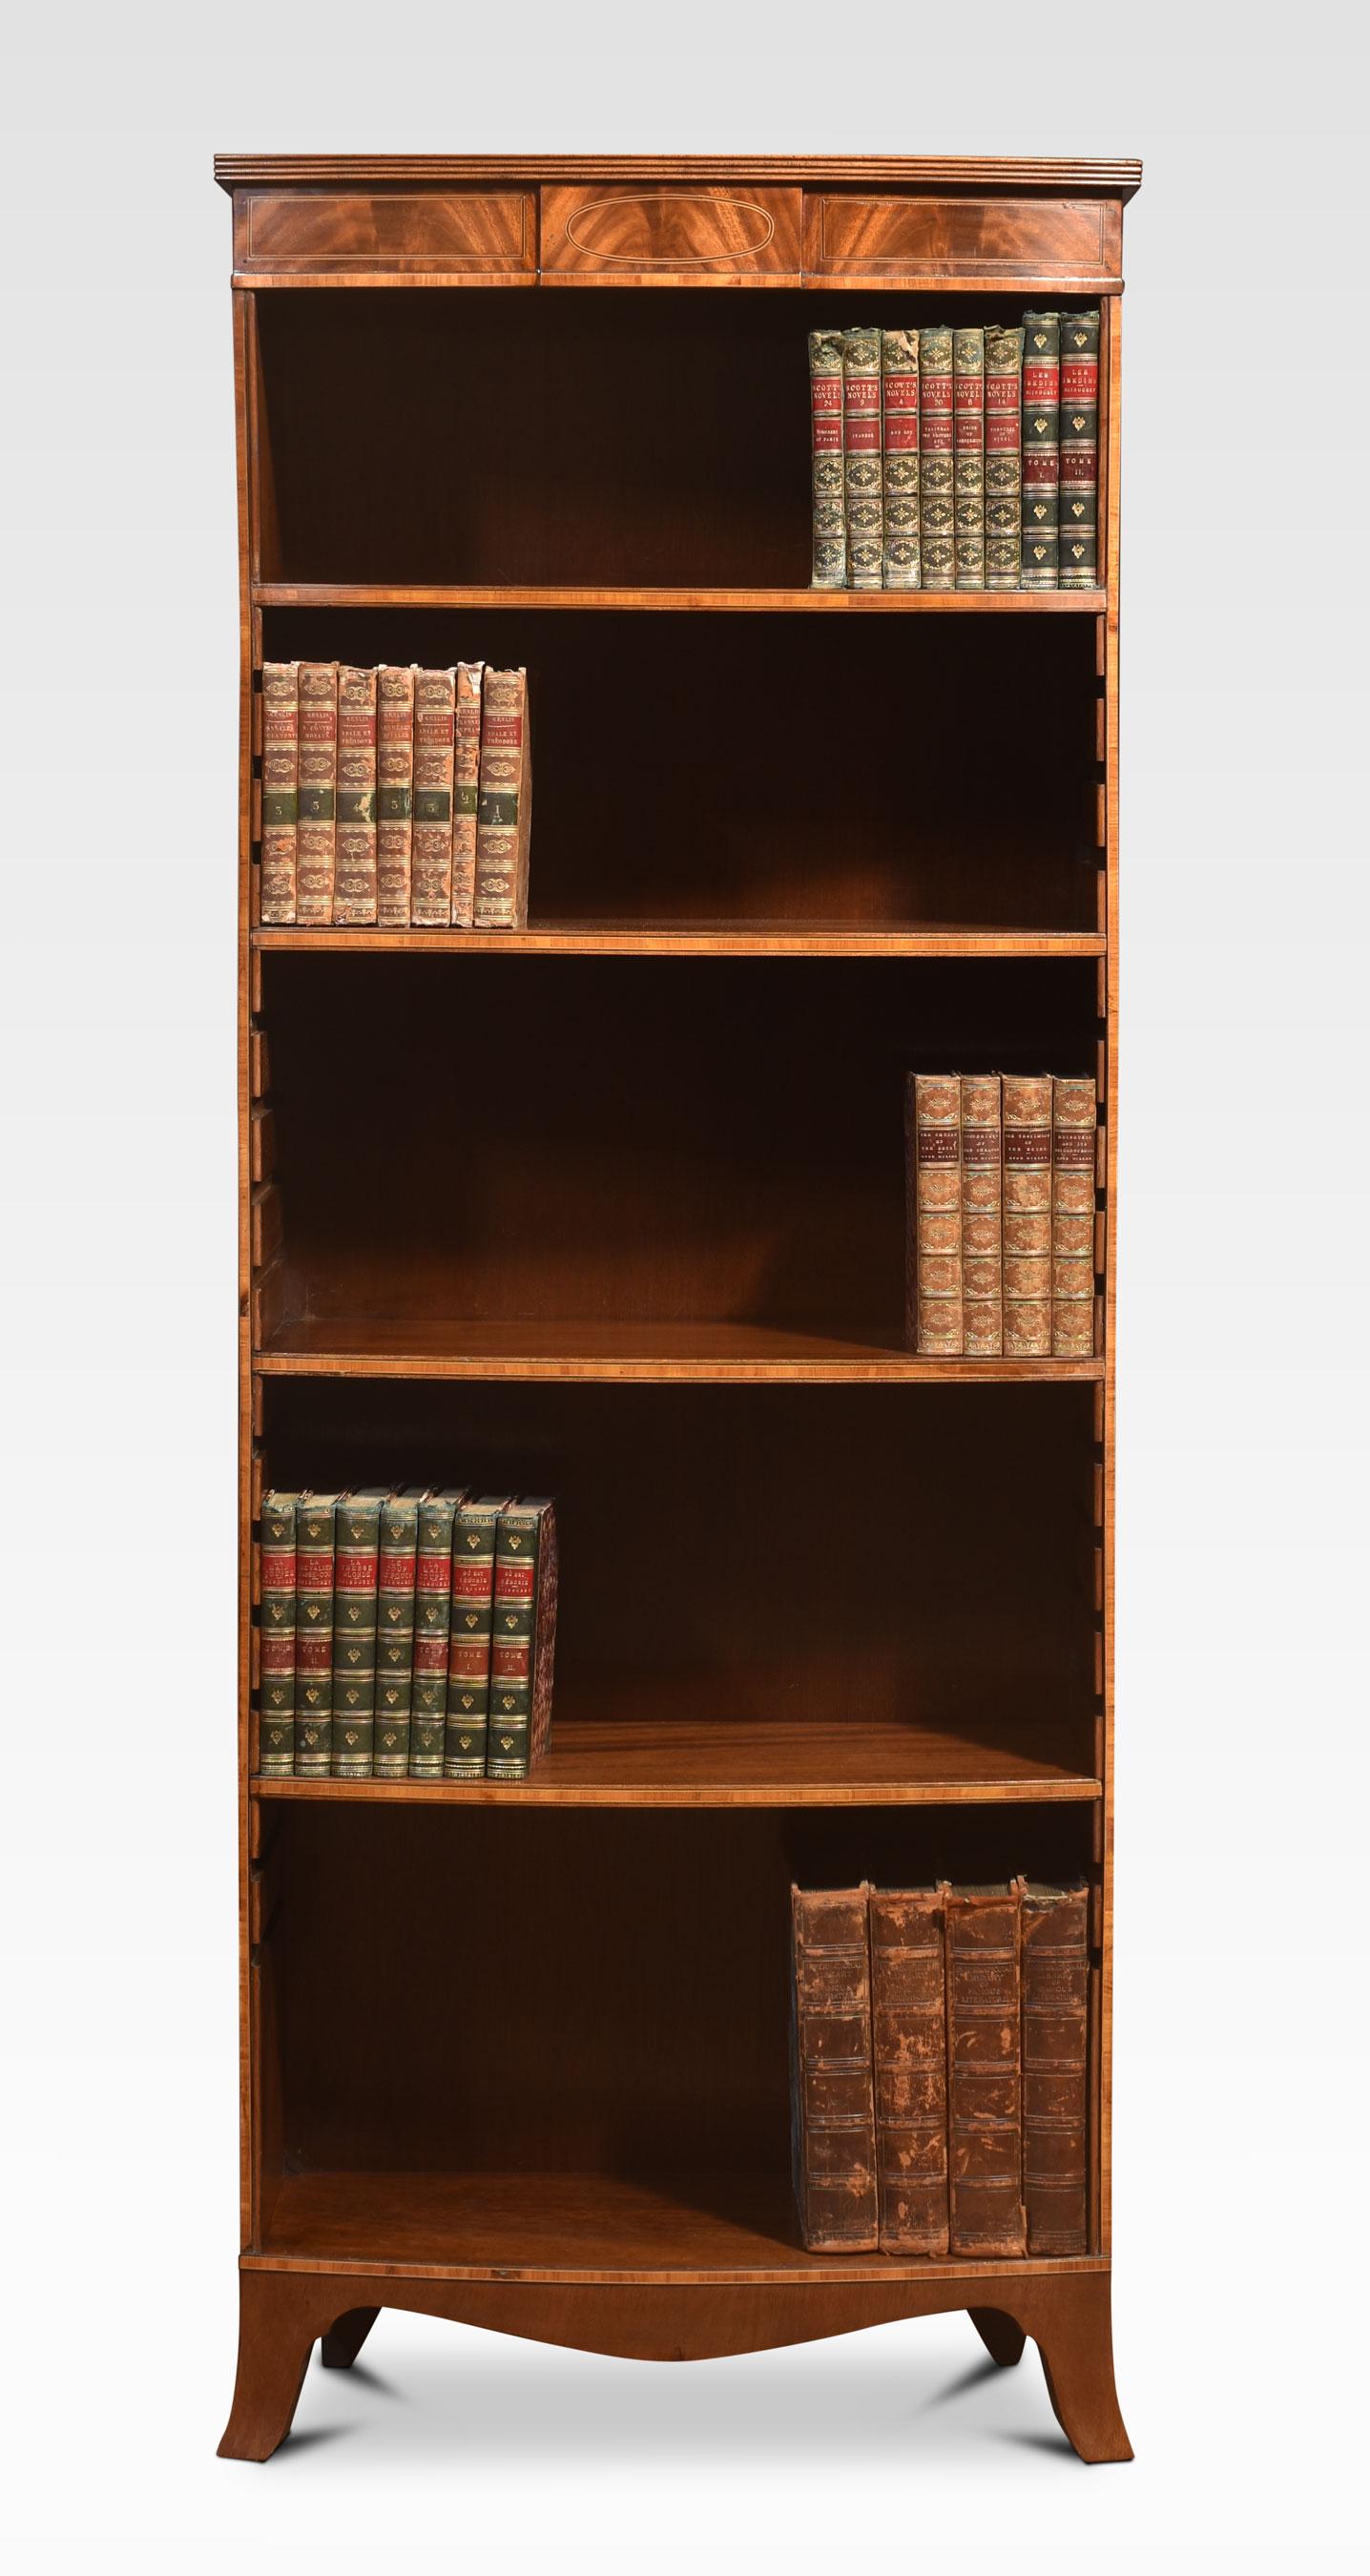 Bow-fronted Mahogany inlaid open bookcase the shaped moulded top above shelved interior. Flanked by satinwood stringing. All raised on a shaped plinth and splayed feet.
Dimensions
Height 60.5 Inches
Width 24 Inches
Depth 10 Inches